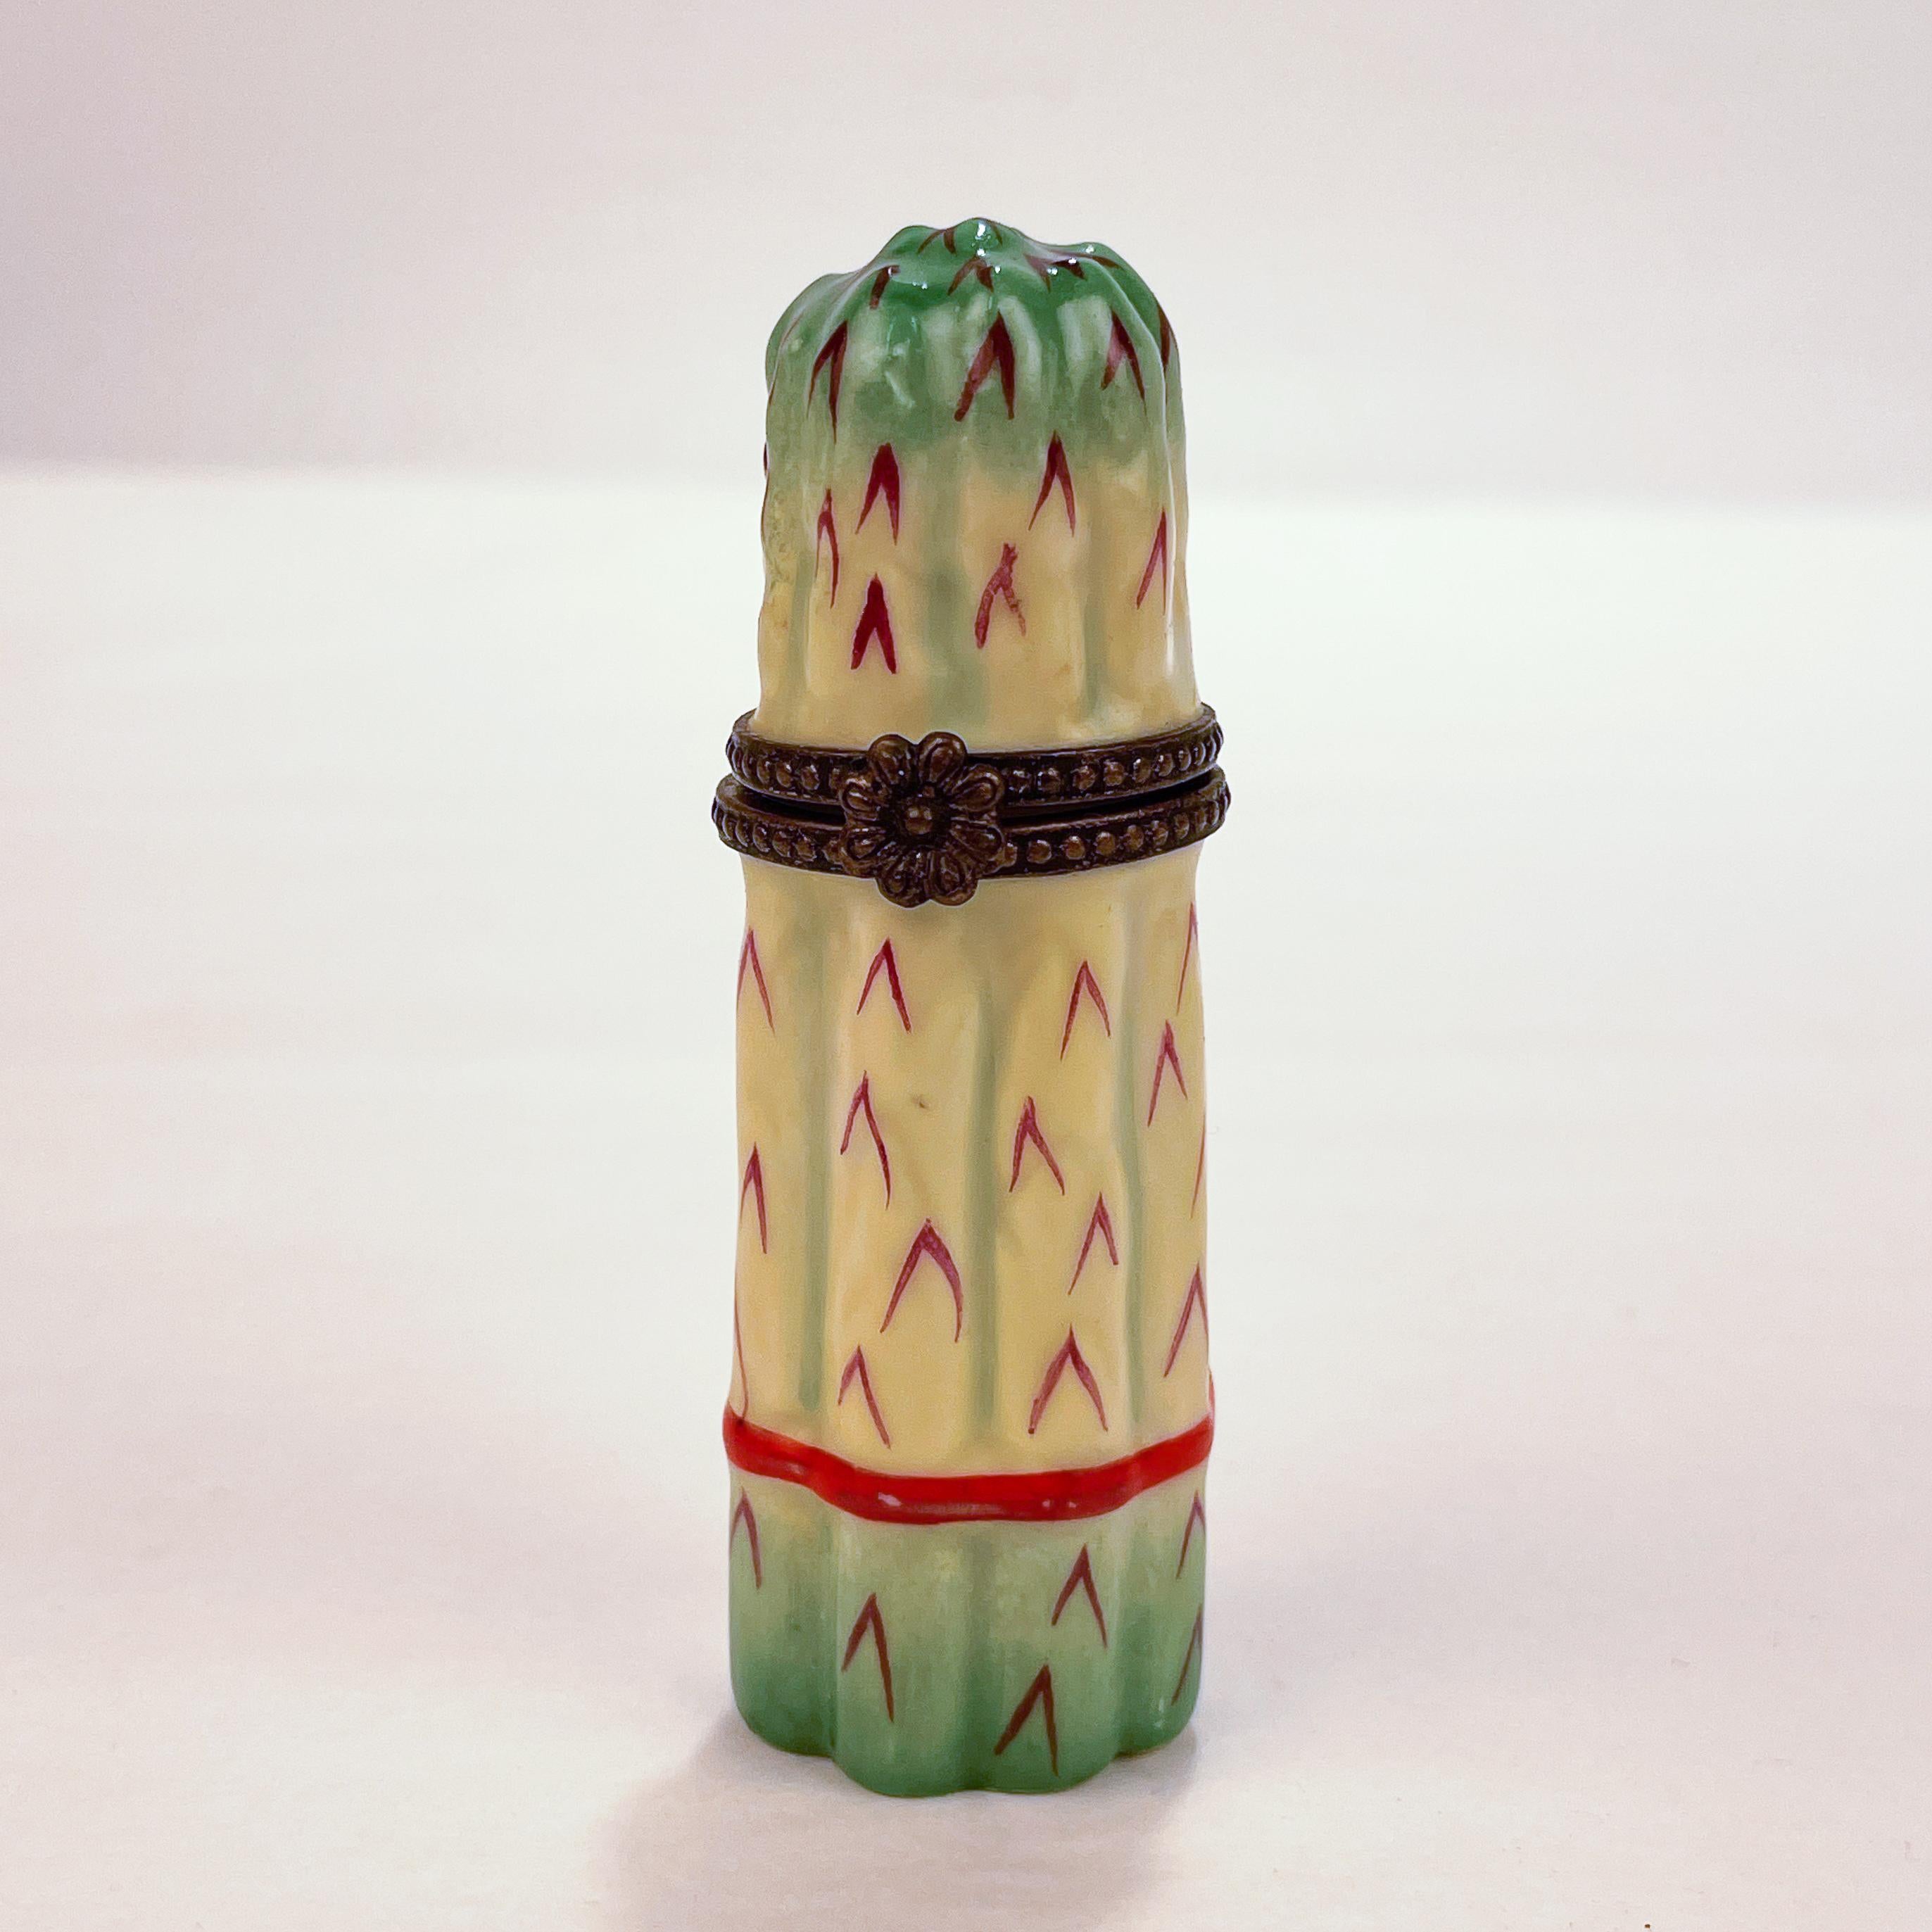 A fine, hinged Limoges porcelain traditional snuff box in the form of a bundle of asparagus. 

Retailed by Asprey.

Simply a lovely box!

Provenance: By repute, from the estate of Susan & John Gutfreund (The 'King of Wall Street').

Date:
Late 20th